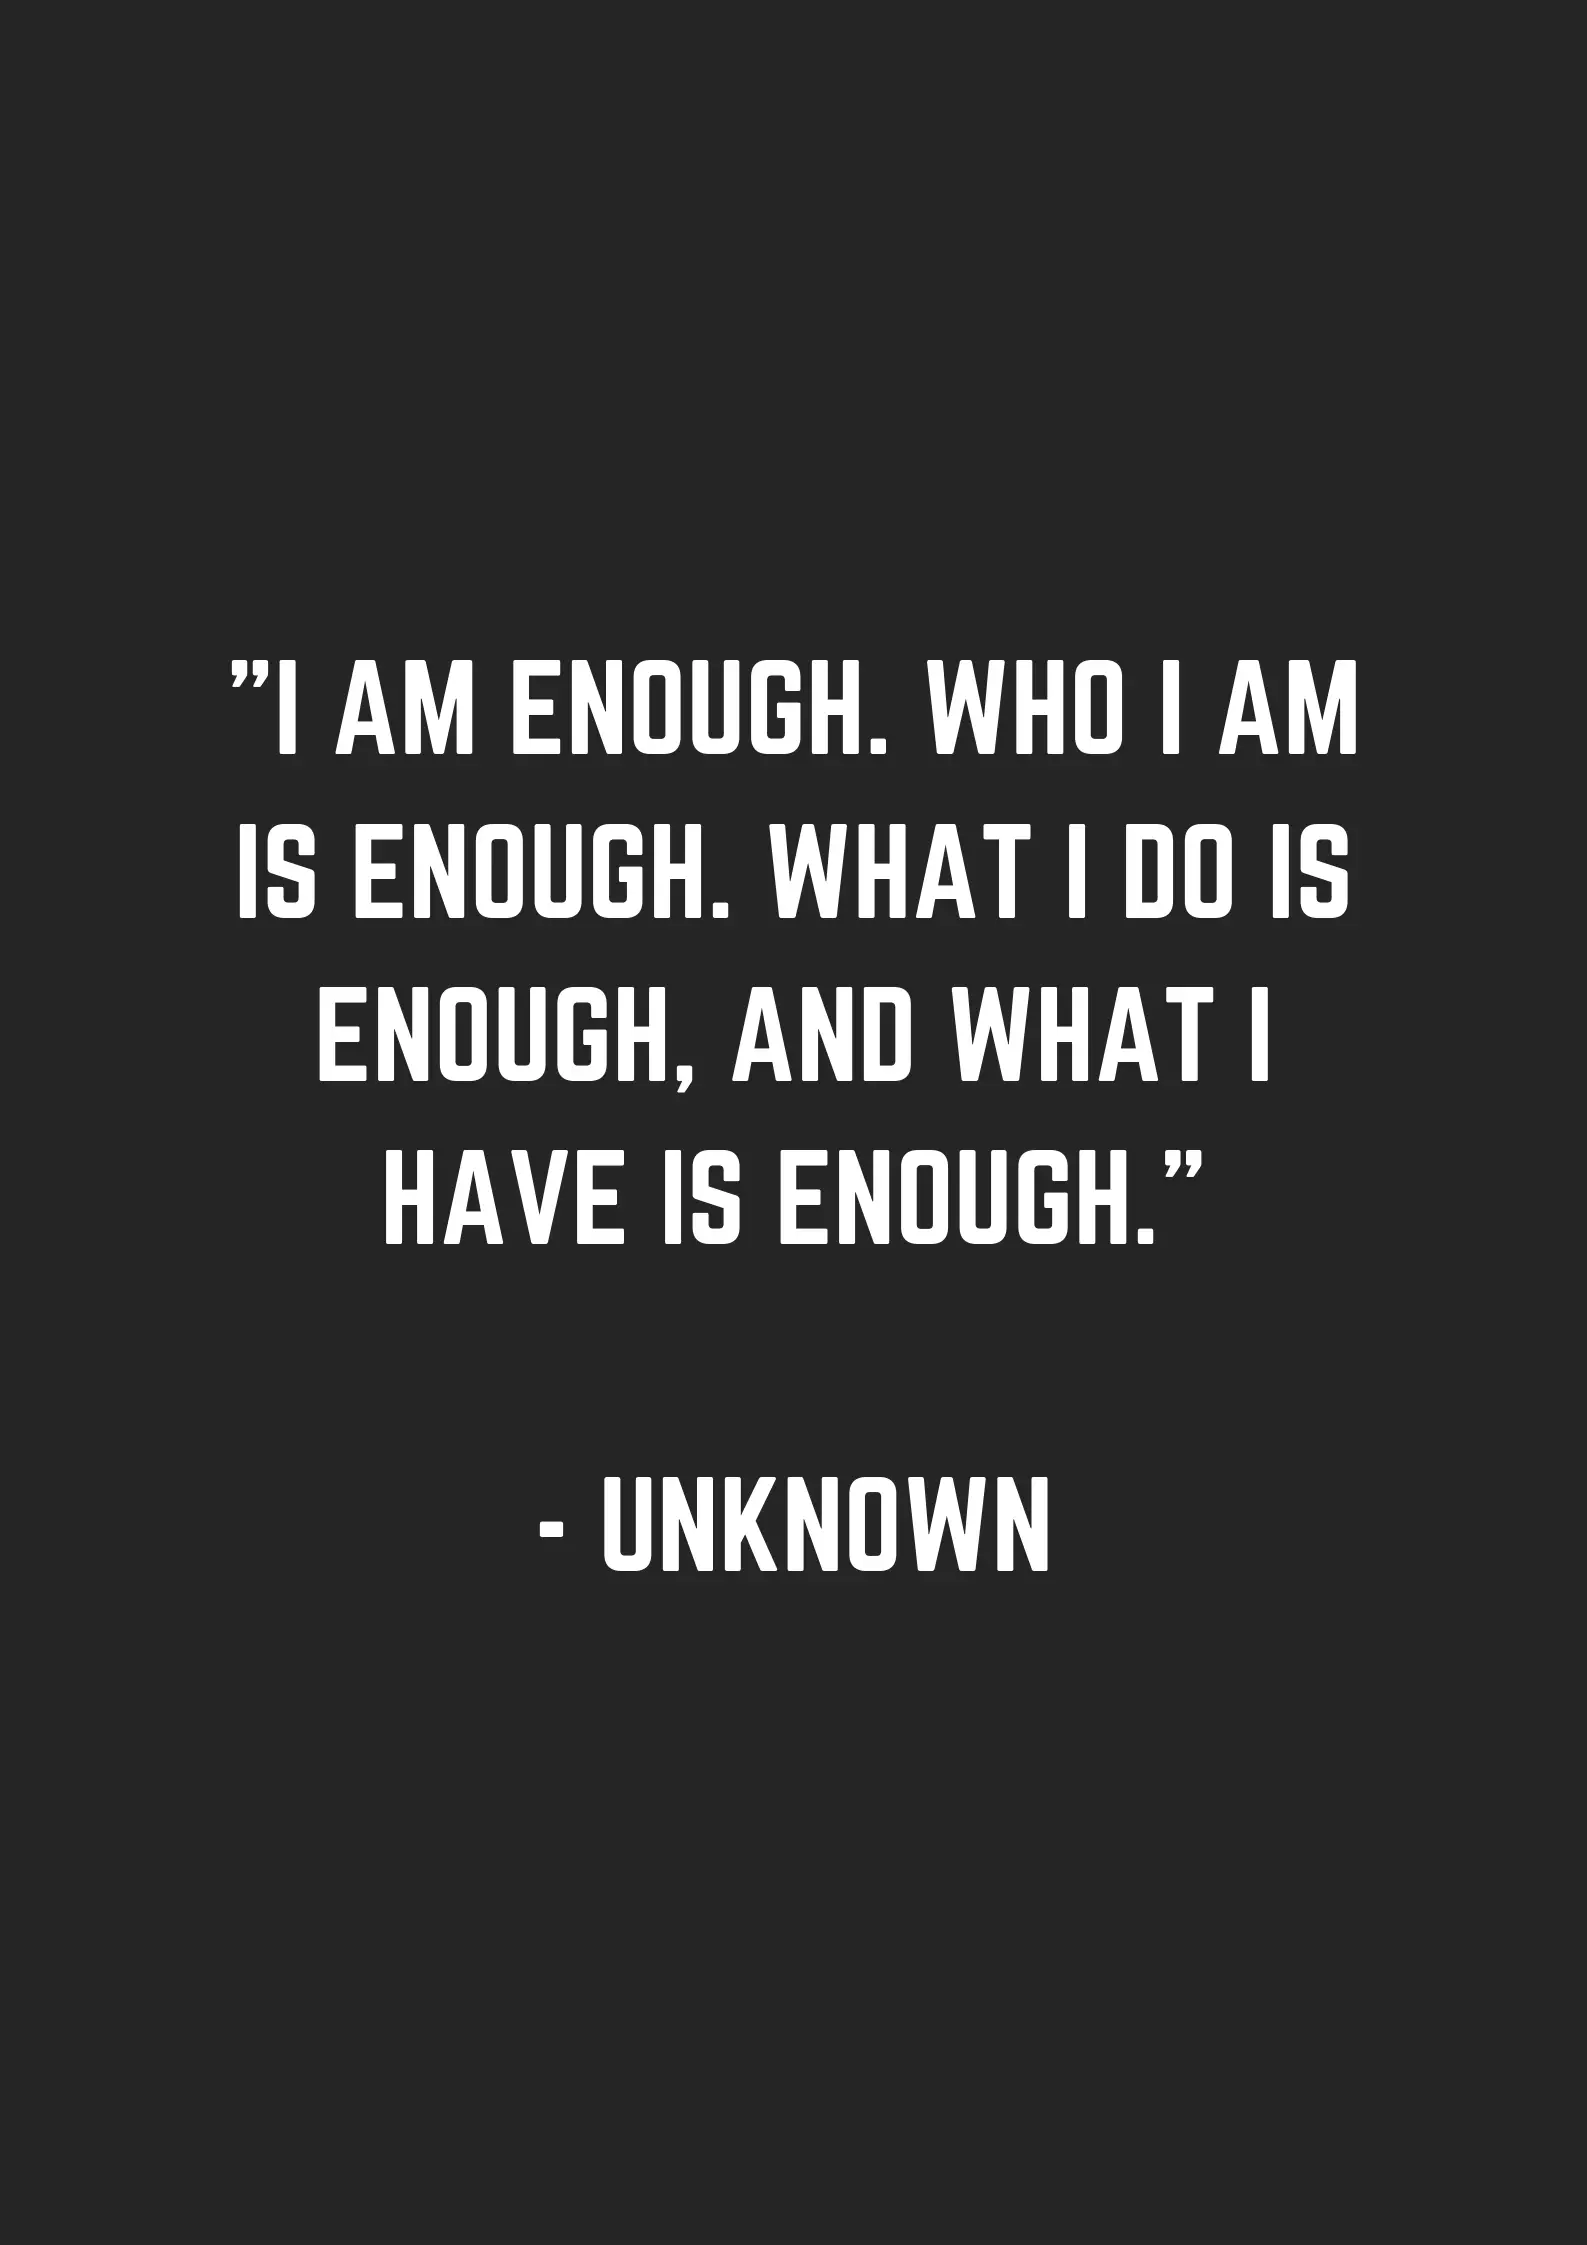 I AM ENOUGH - museuly